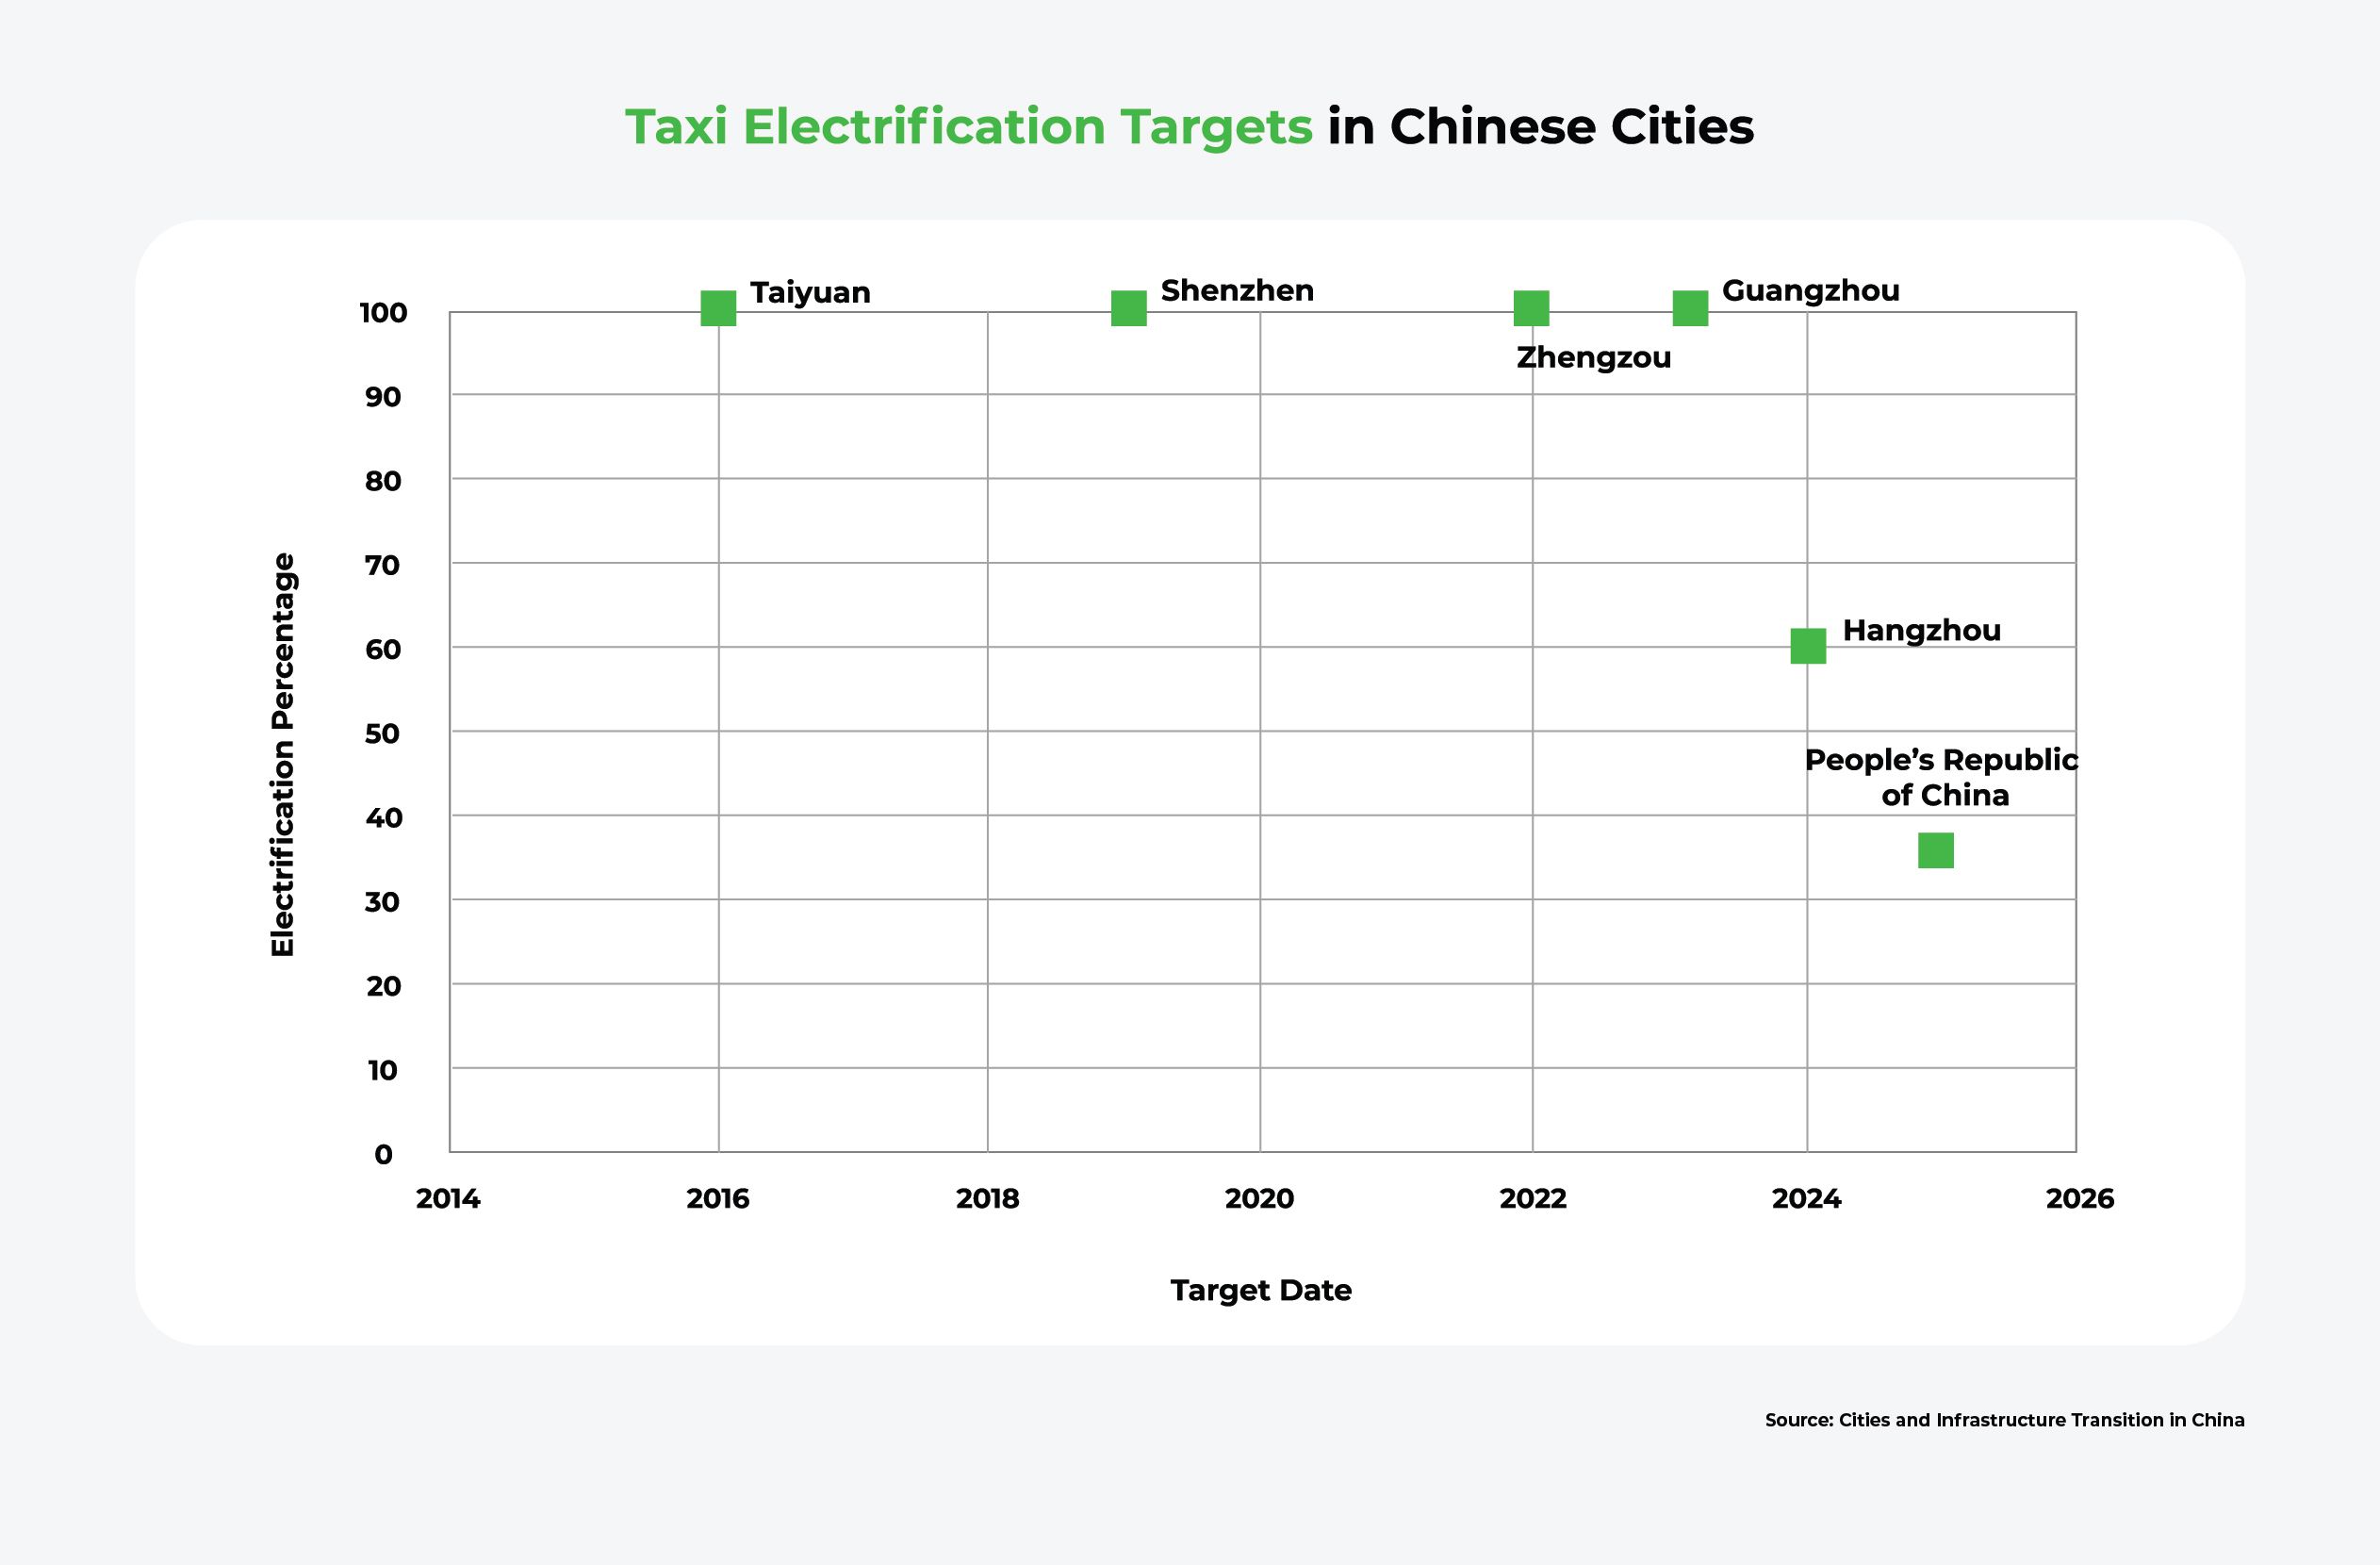 A scatter plot showing several Chinese cities' taxi electrification targets